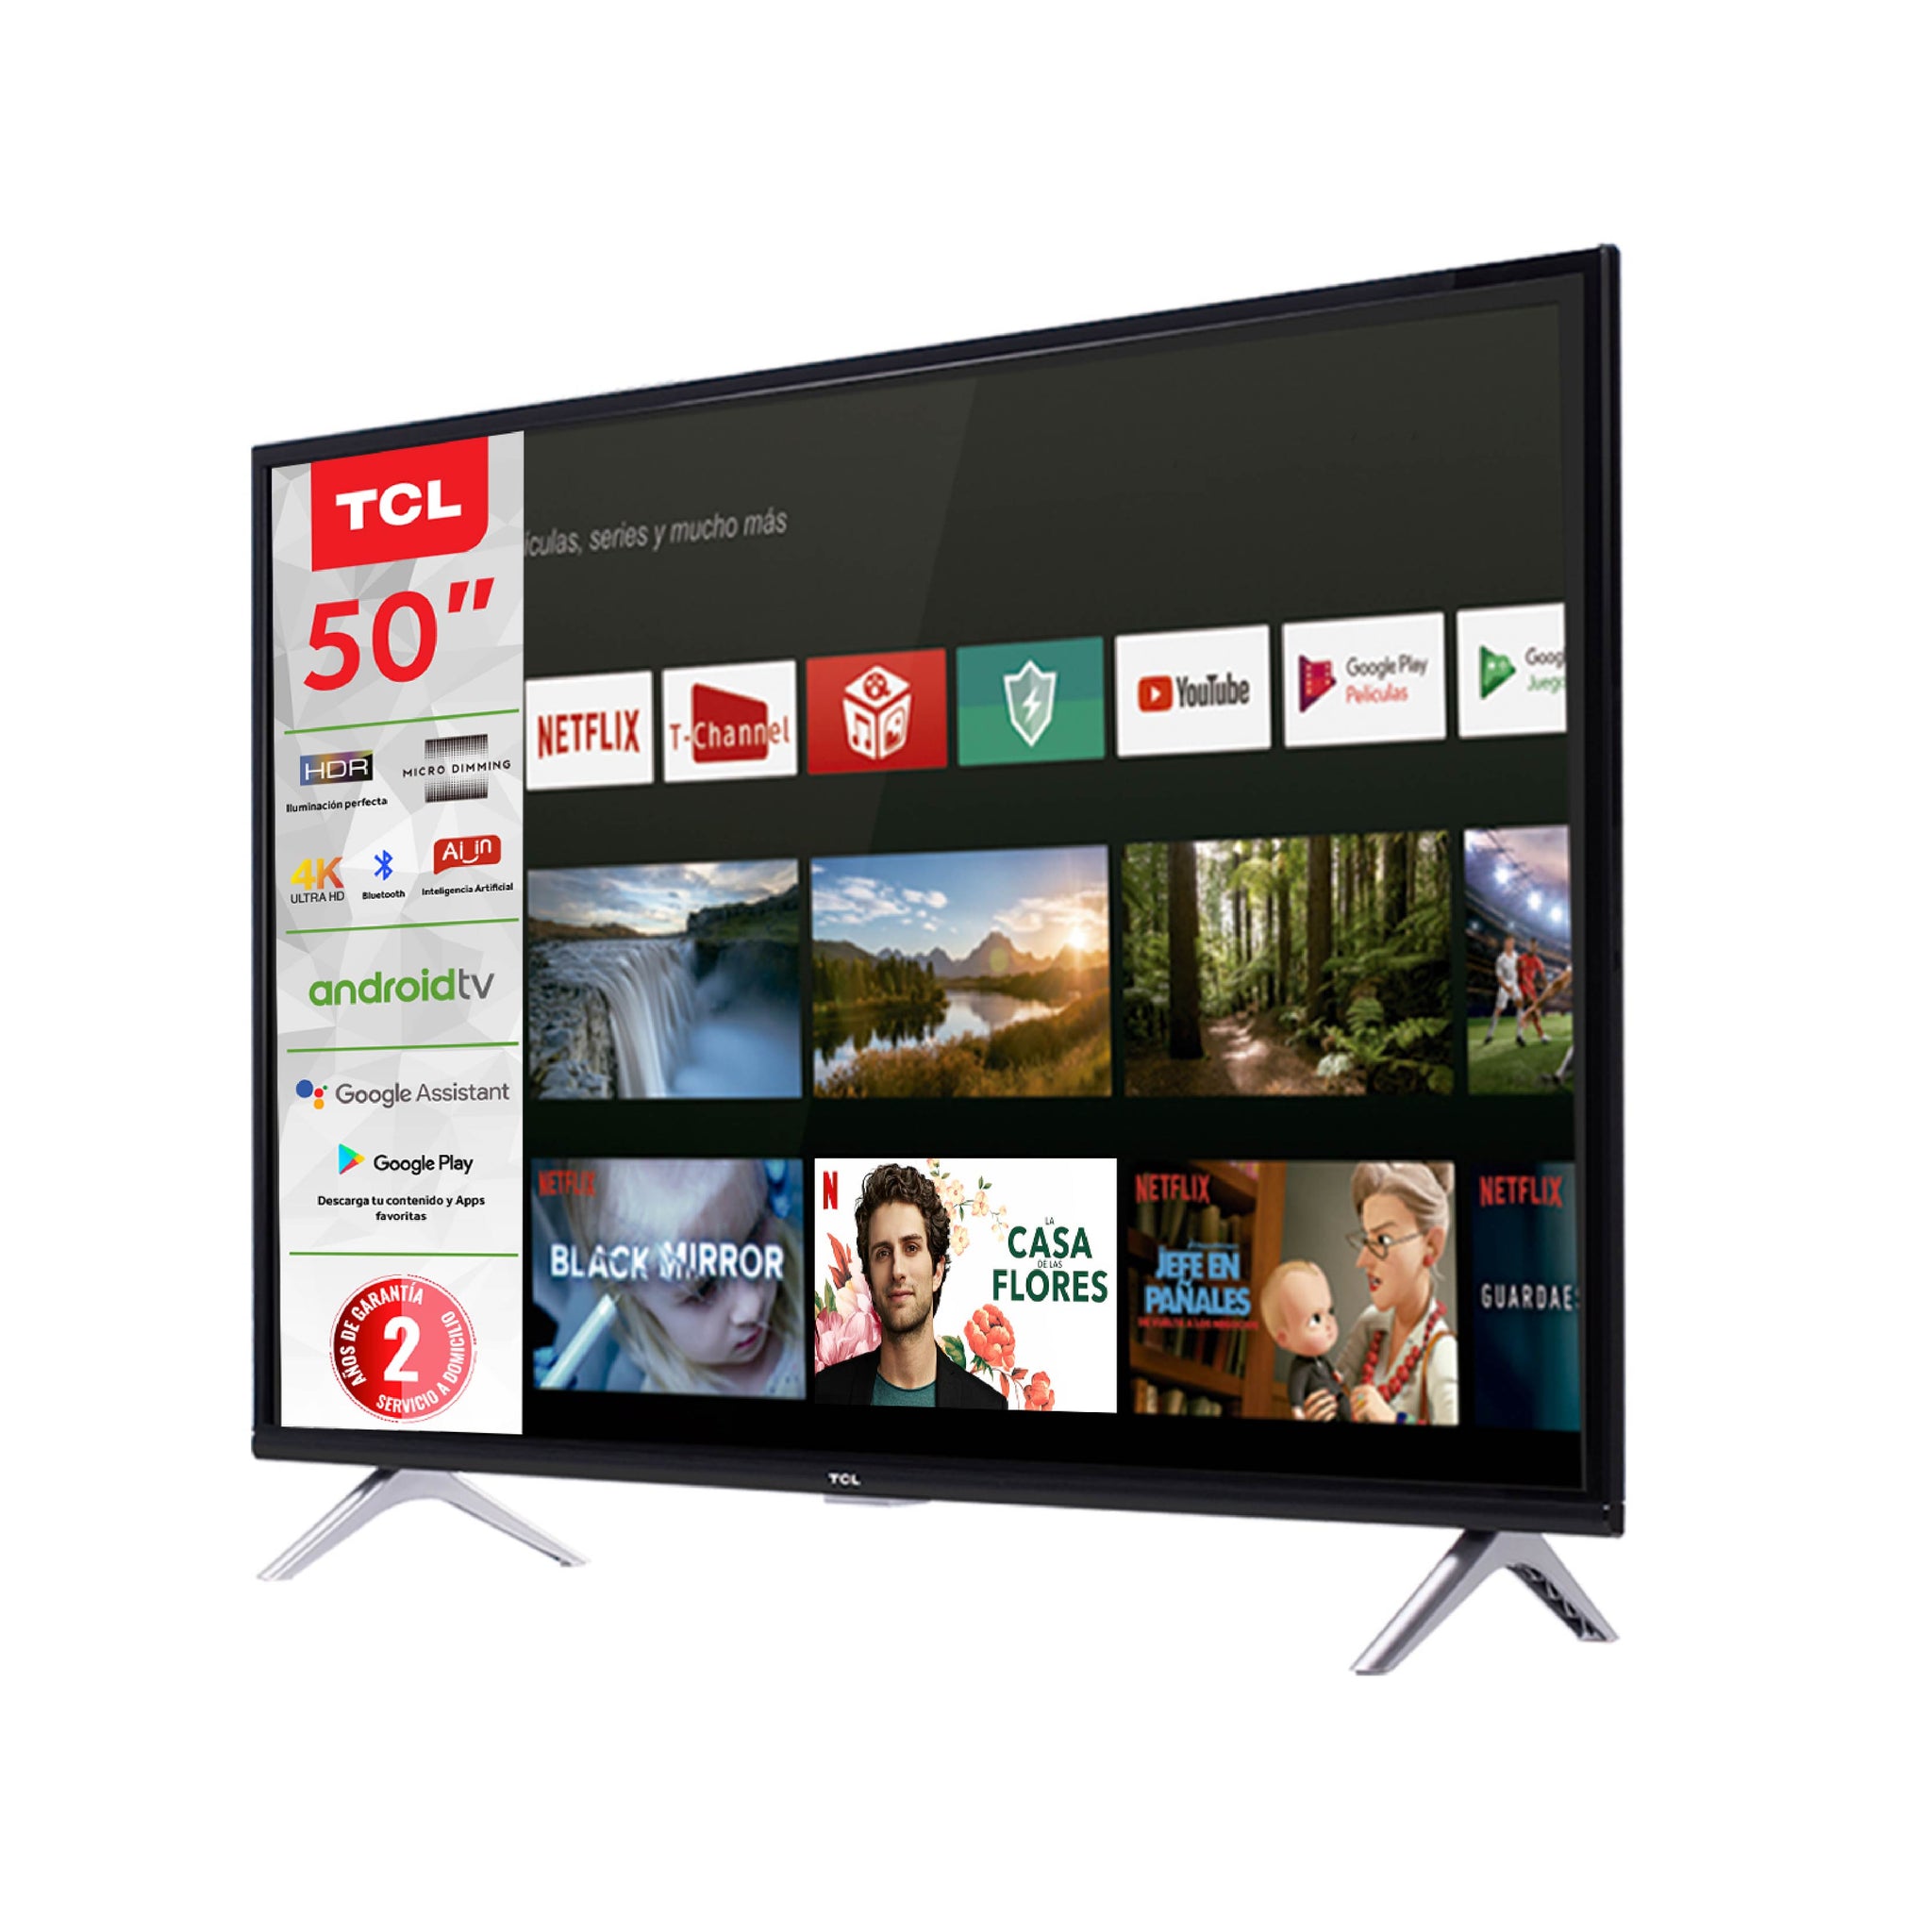 Televisor TCL 50A435 4K Smart Android 50"